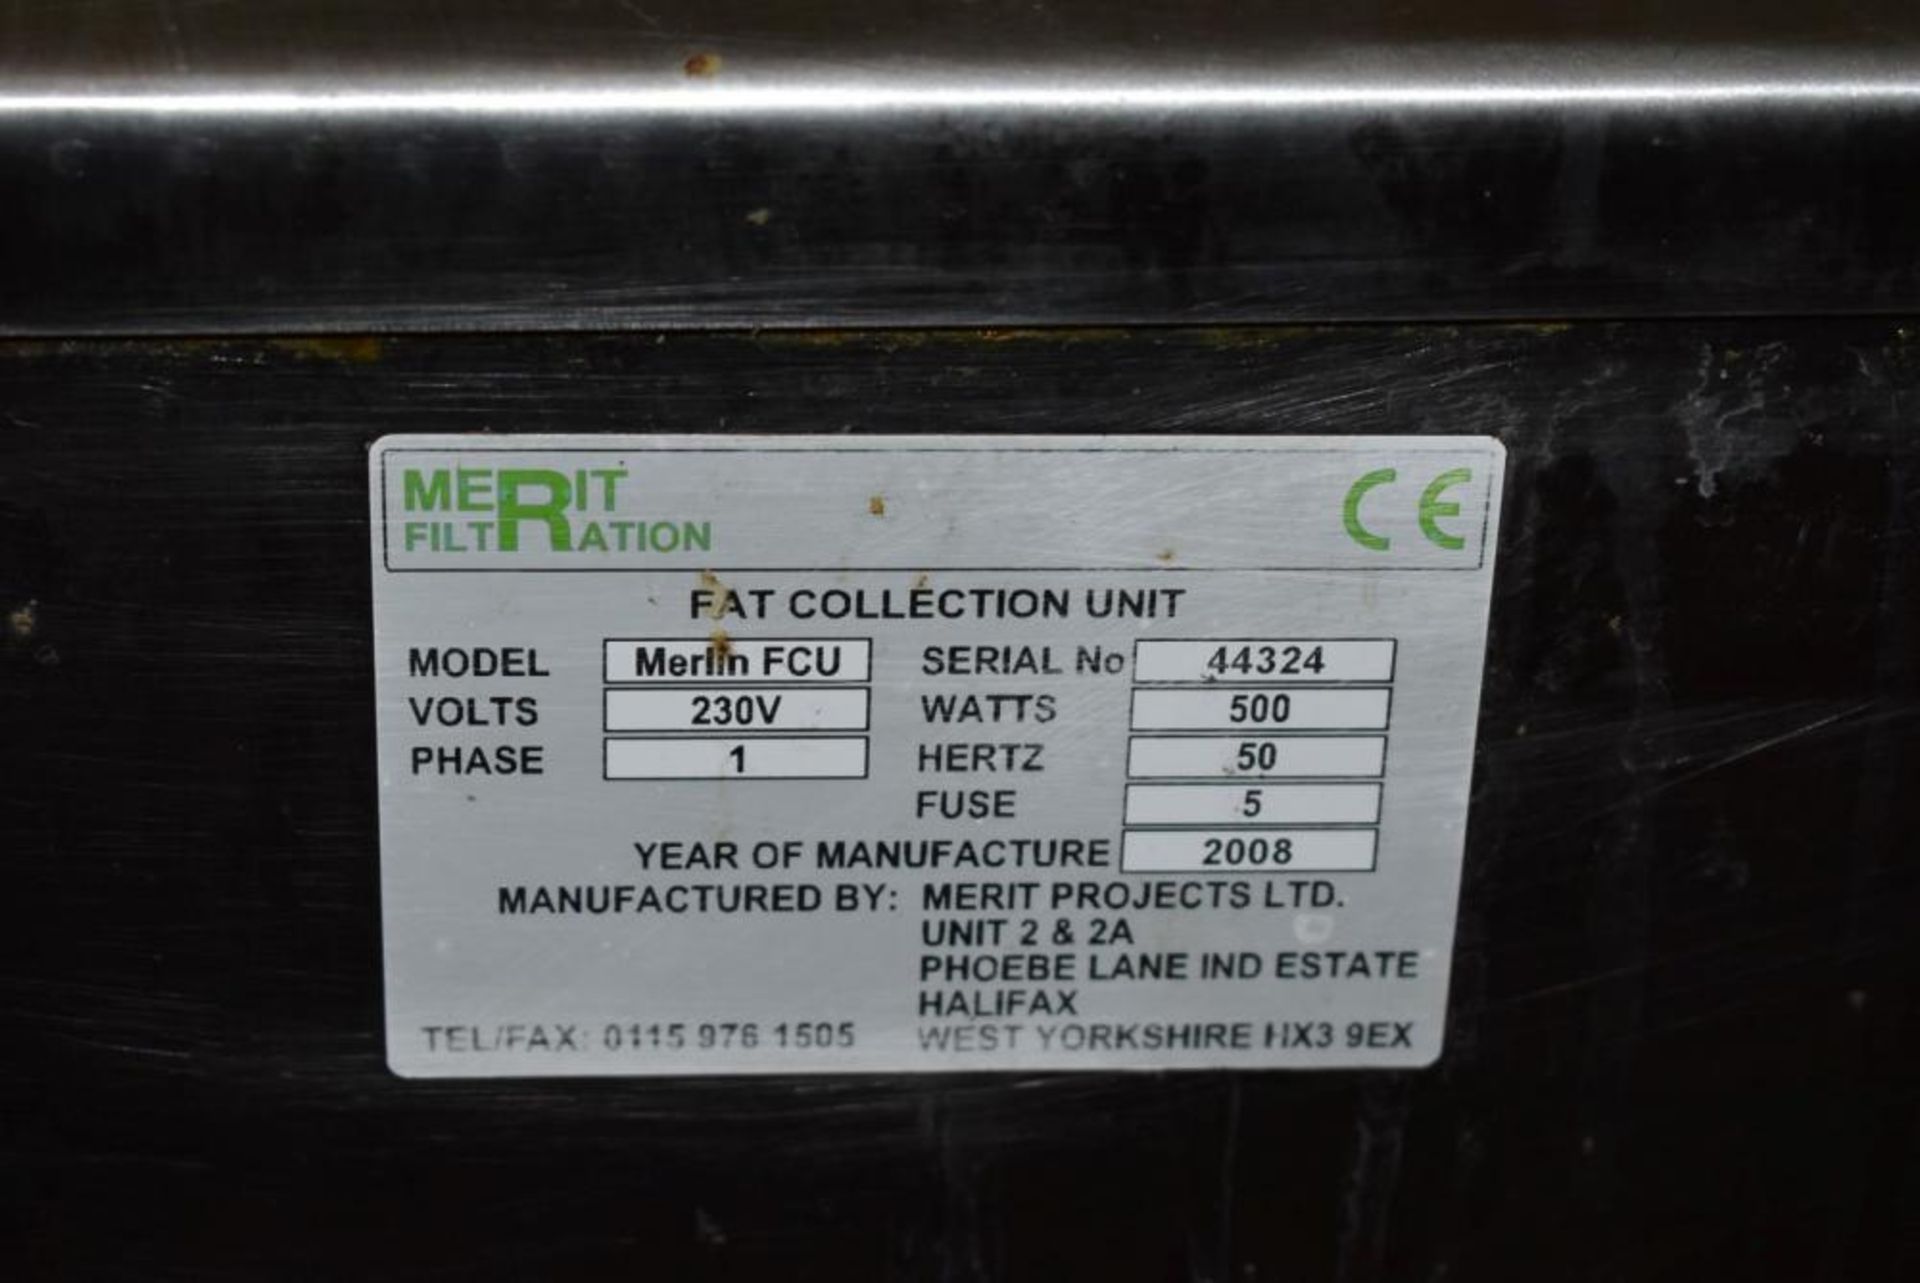 1 x Merlin FCU Fat Collection Unit For Commercial Kitchens - CL232 - Ref LF294 E2A - Location: Altin - Image 5 of 7